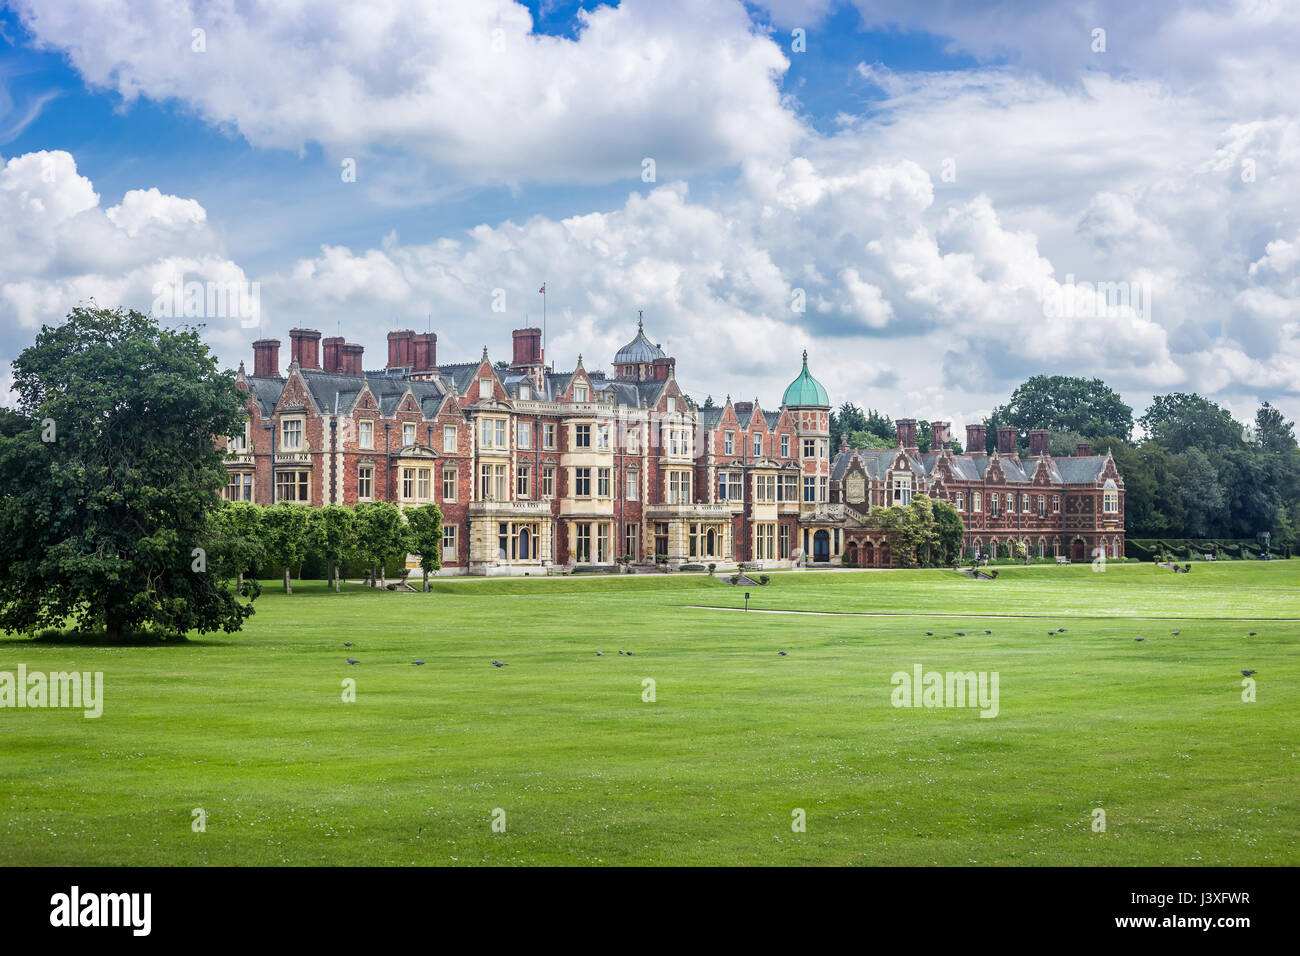 Sandringham House, the Queen's country residence in Norfolk, United Kingdom Stock Photo